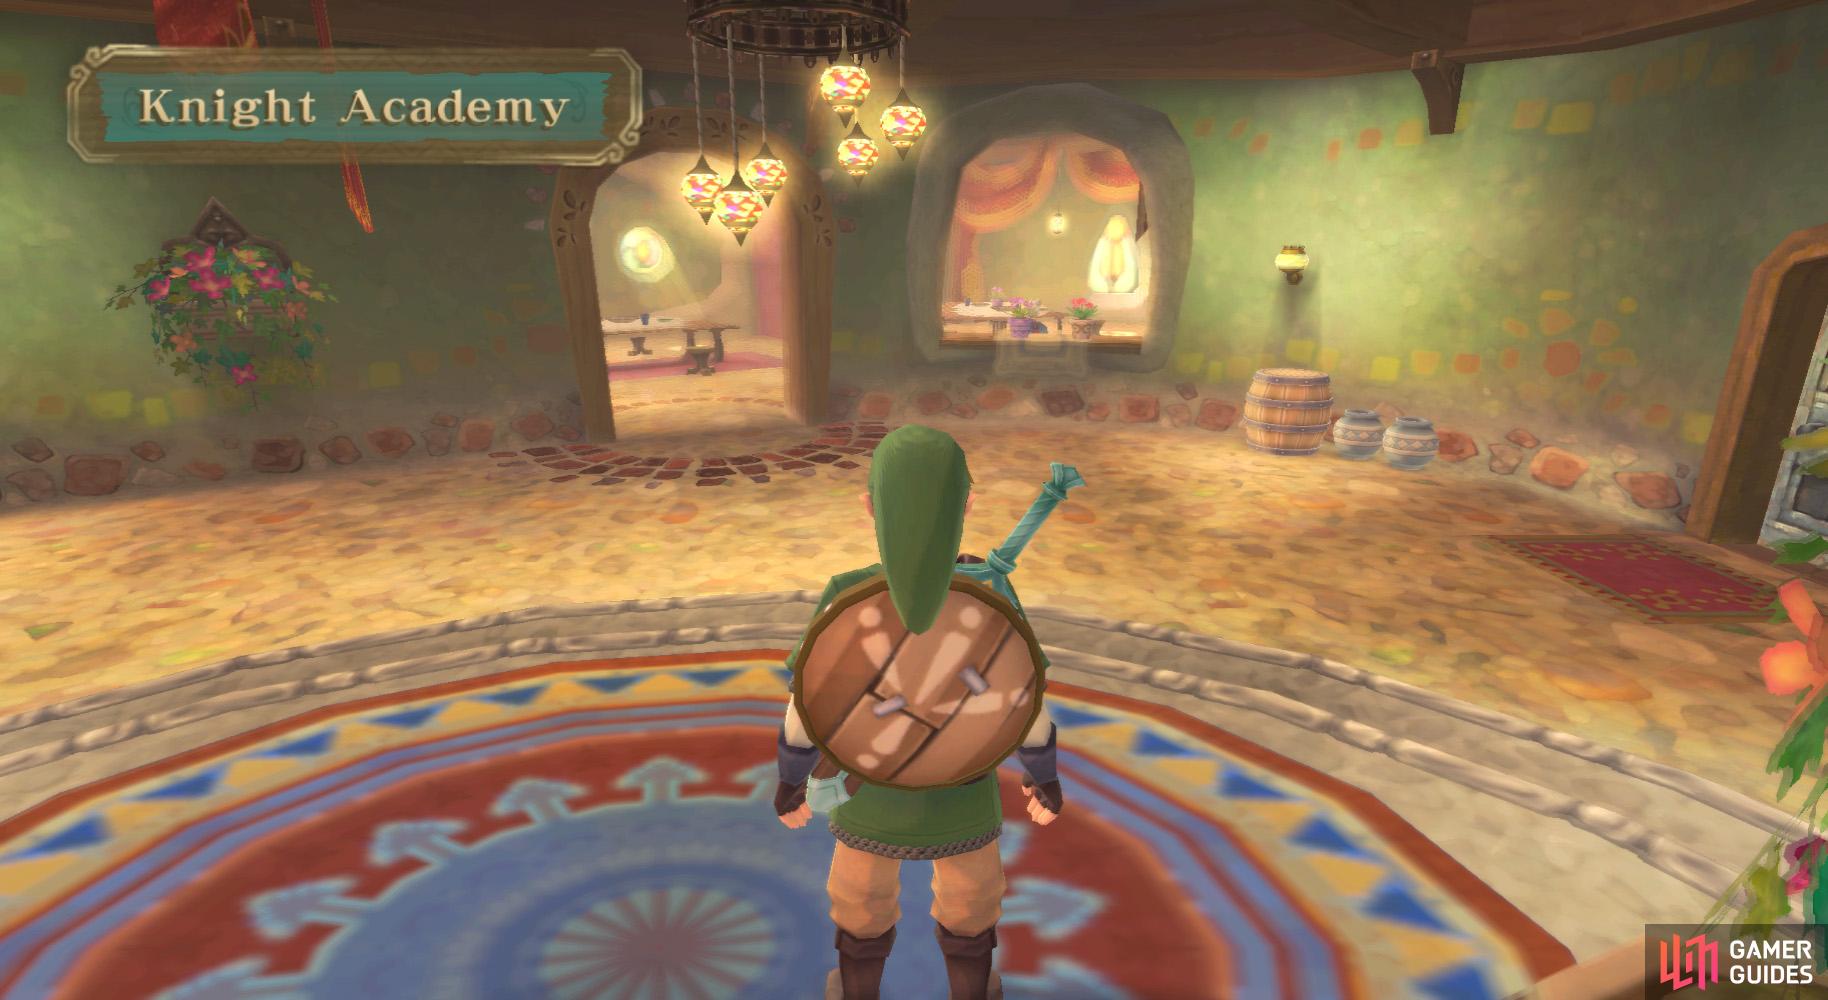 Youll begin the game inside the Knight Academy.